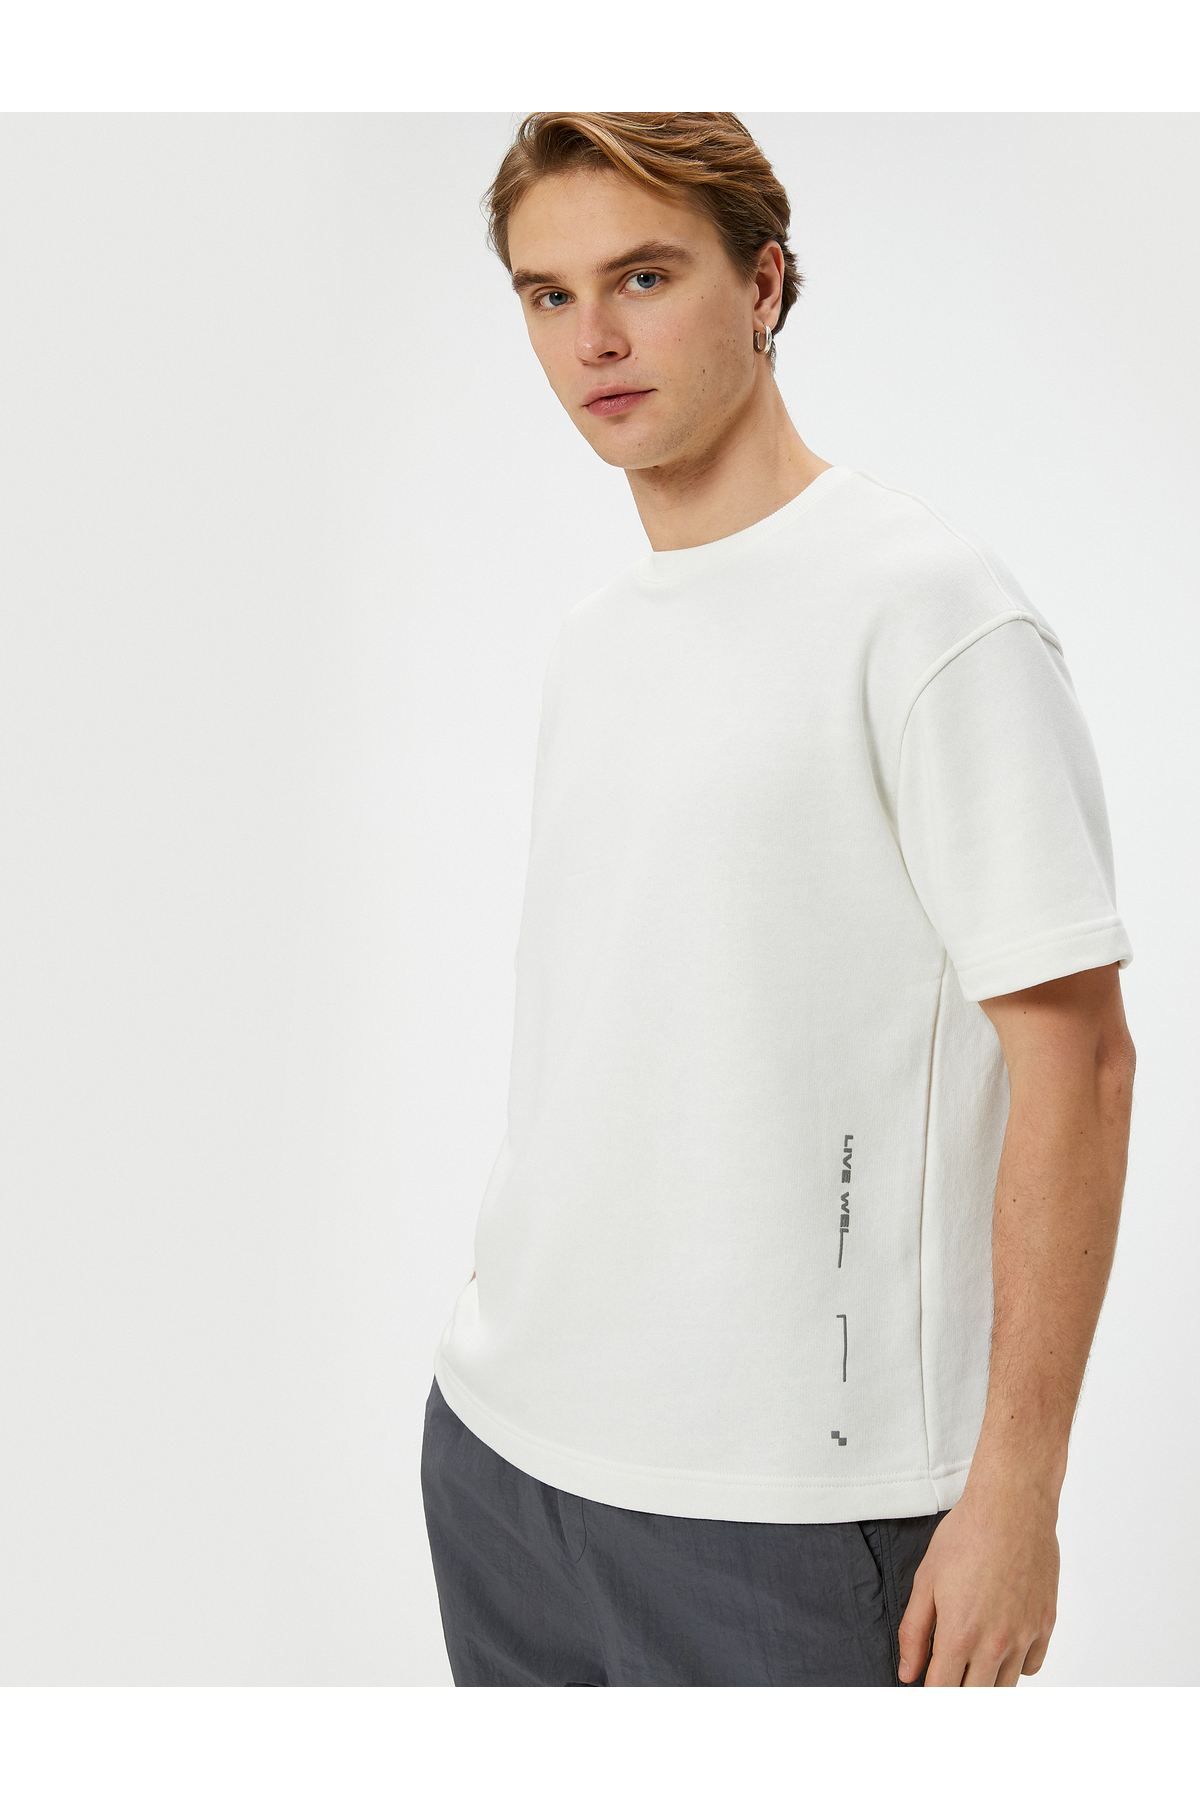 Koton Oversized T-Shirt with a slogan printed, short sleeves and a crew neck.